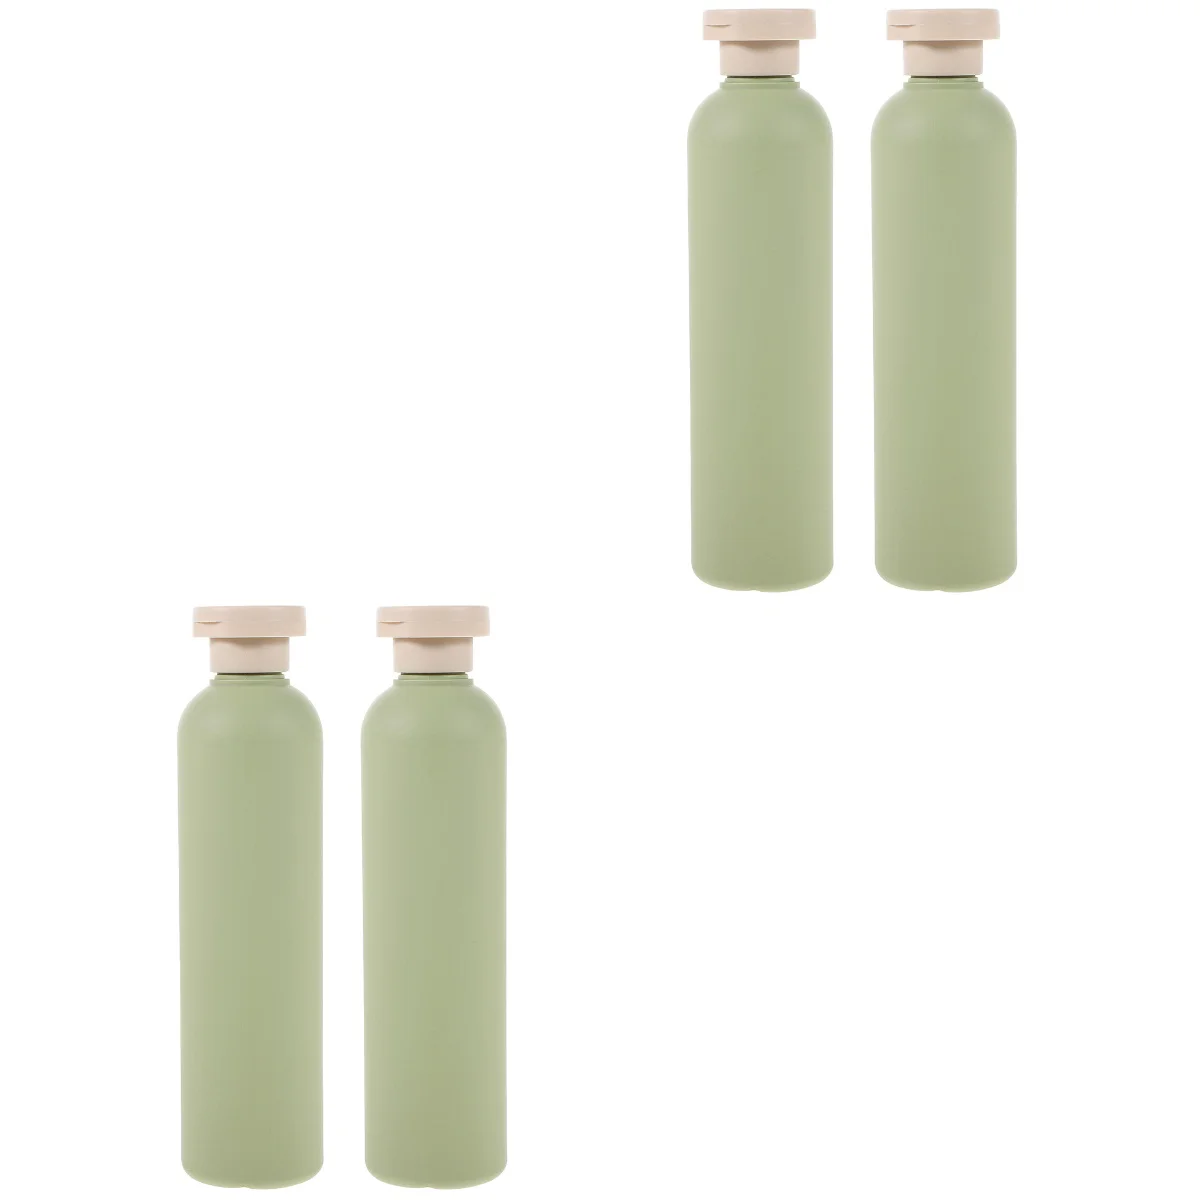 

4 pcs Refillable Travel Bottles Toiletries Lotion Container squeeze Bottles for Shampoo Conditioner(400ml)